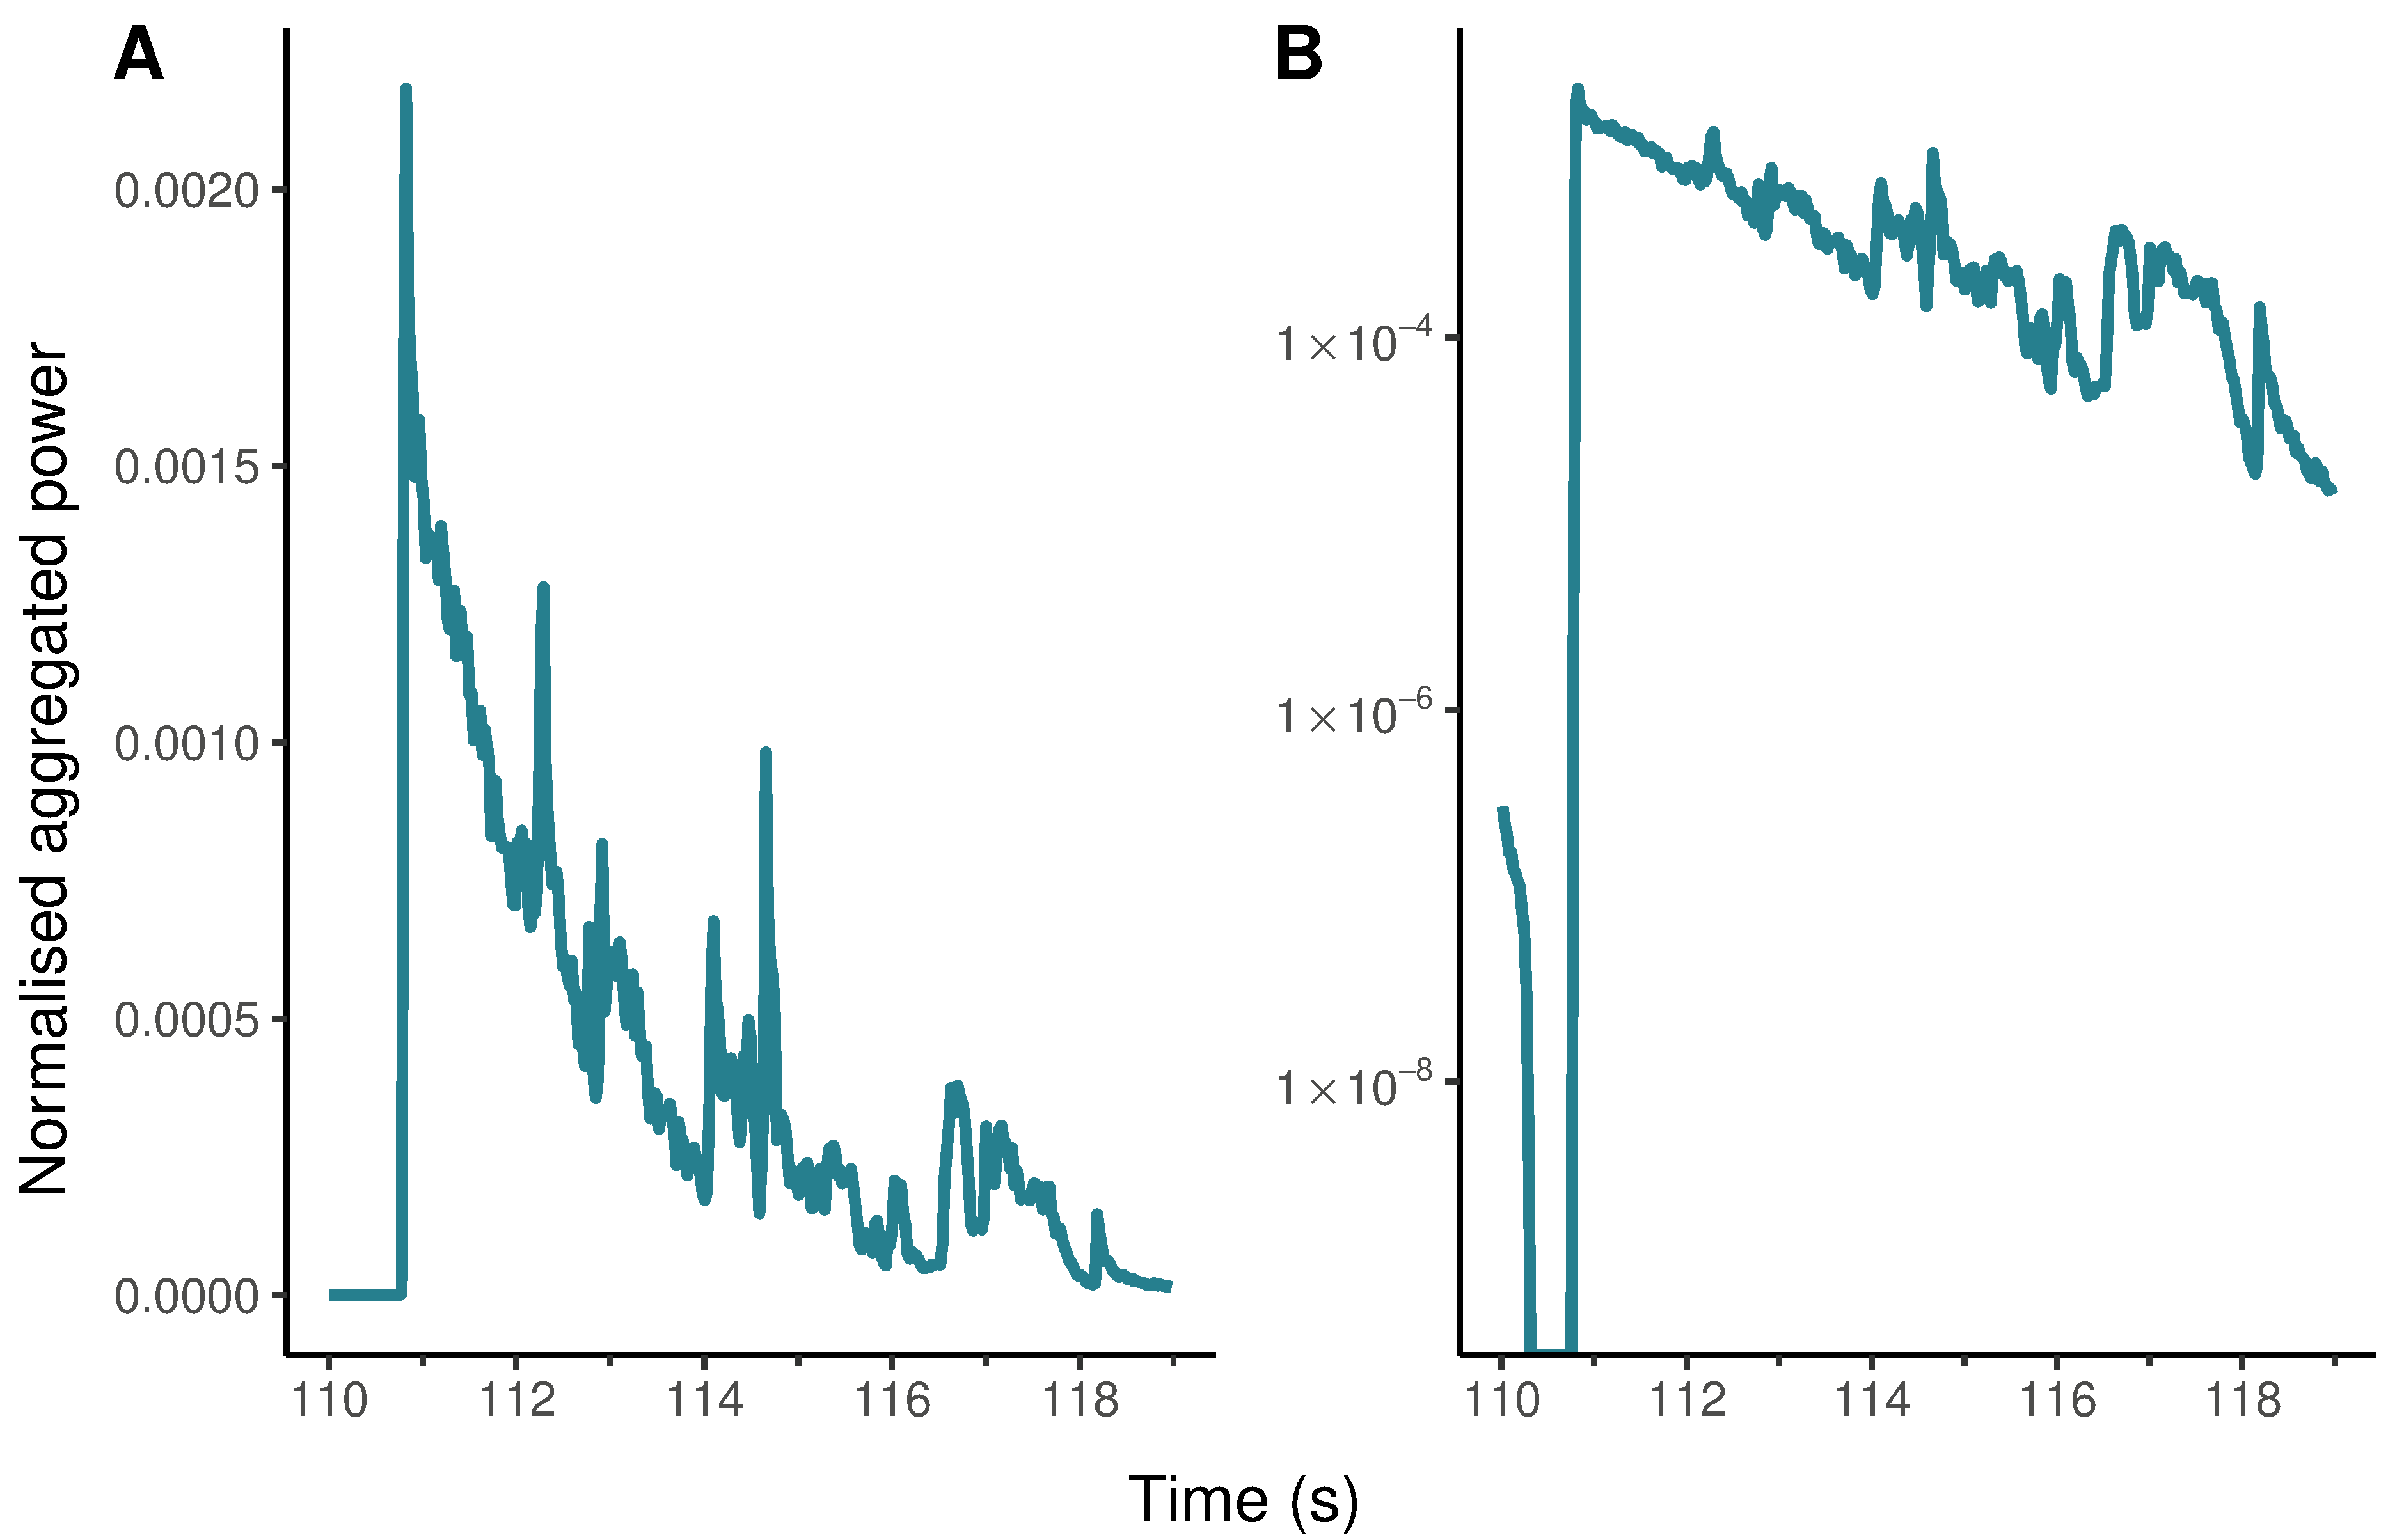 The evolution of an affective event in the trailer for *Insidious: Chapter 3* with normalised aggregated power plotted on (A) linear and (B) logarithmic axes.